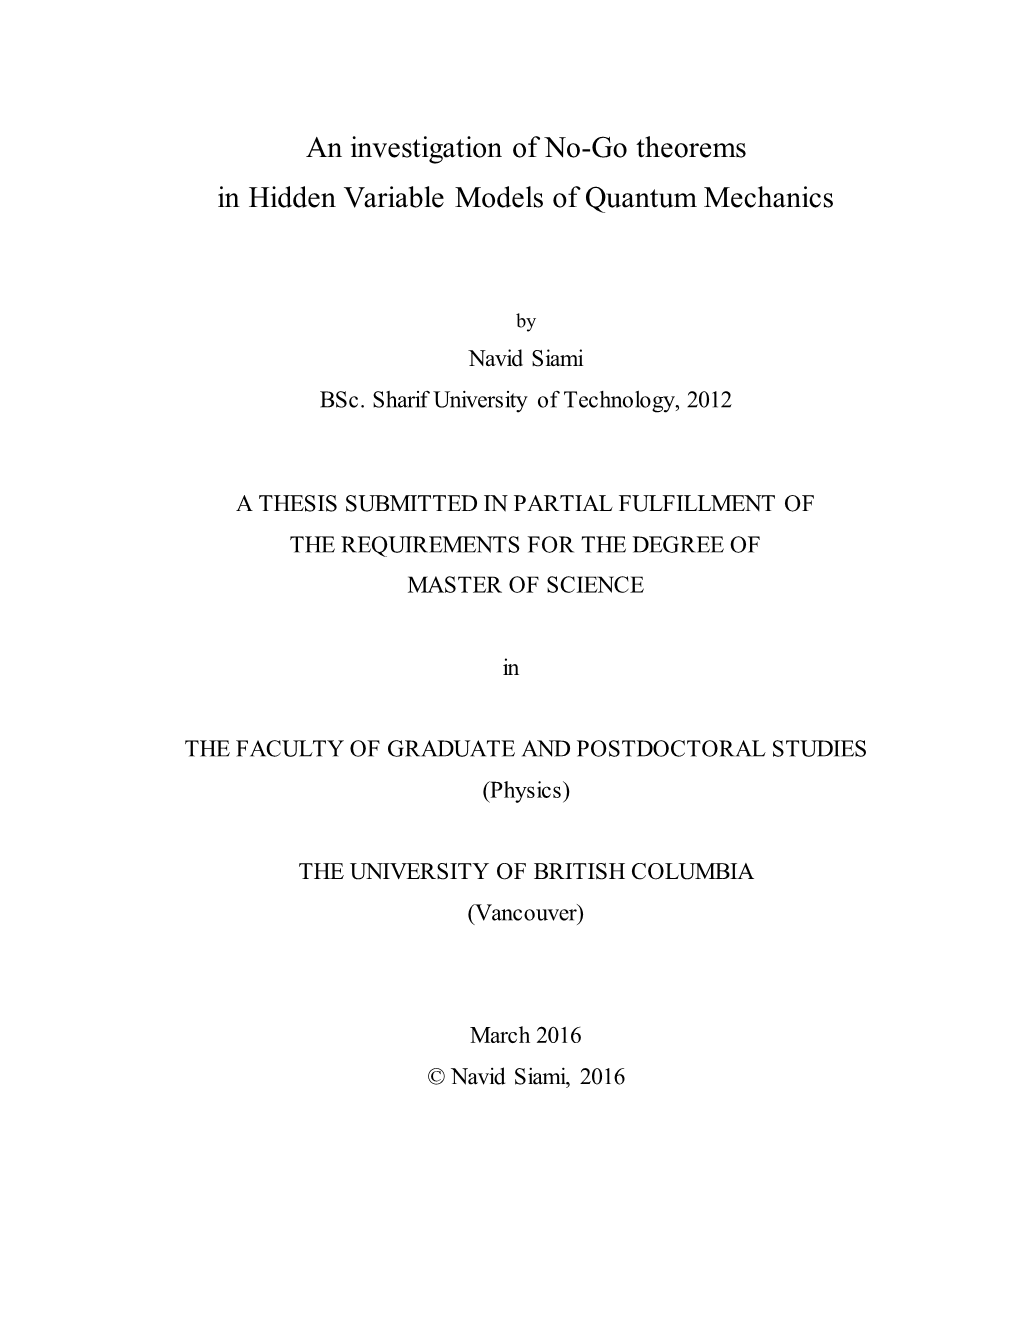 An Investigation of No-Go Theorems in Hidden Variable Models of Quantum Mechanics